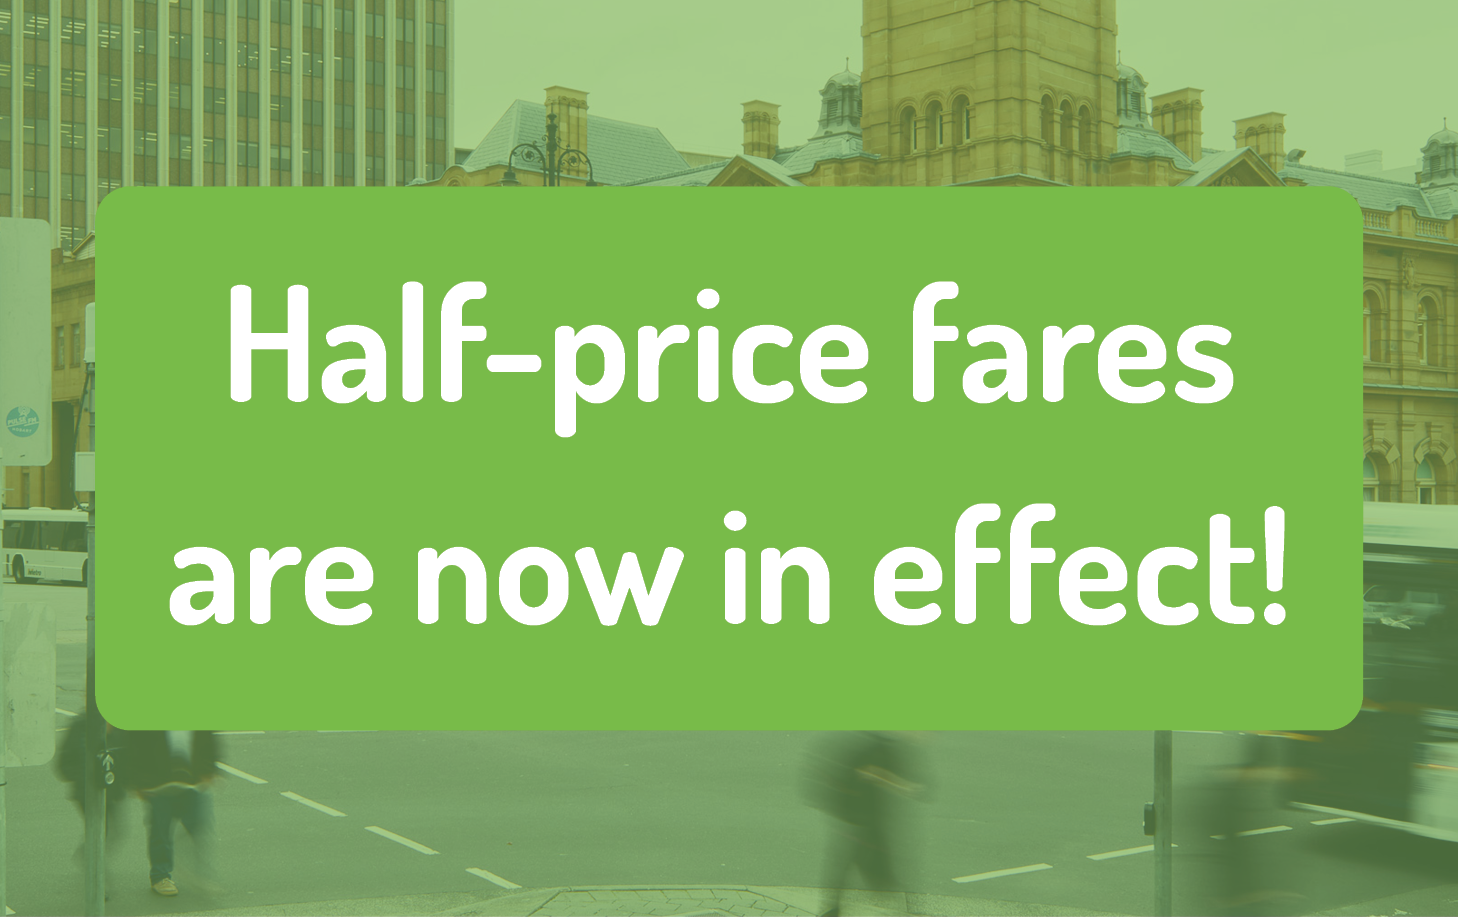 Half-price fares are now in effect!